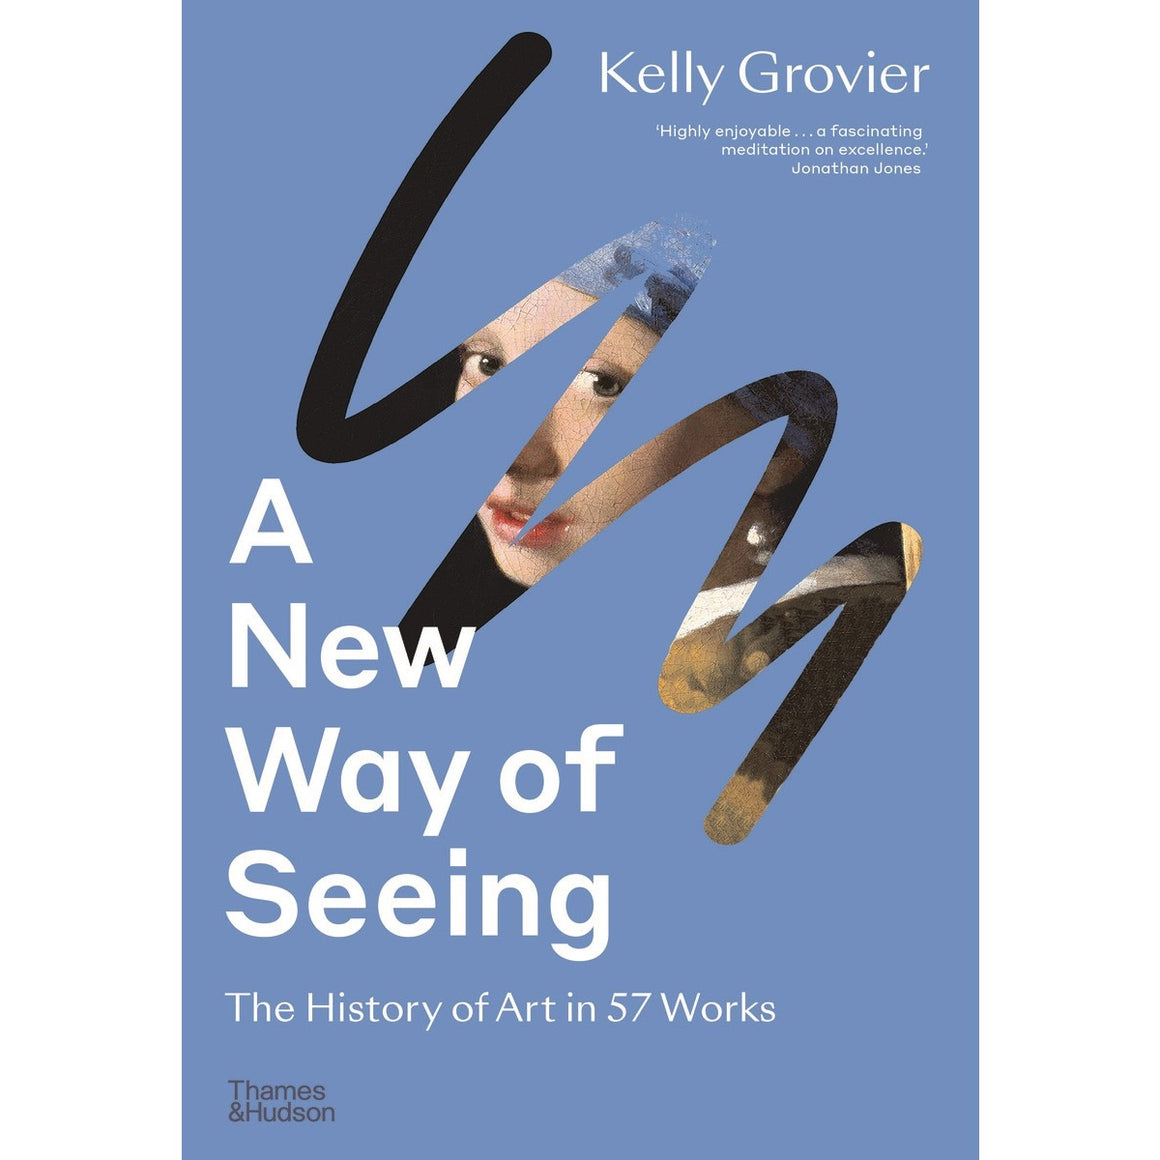 A New Way of Seeing: The History of Art in 57 Works | Author: Kelly Grovier